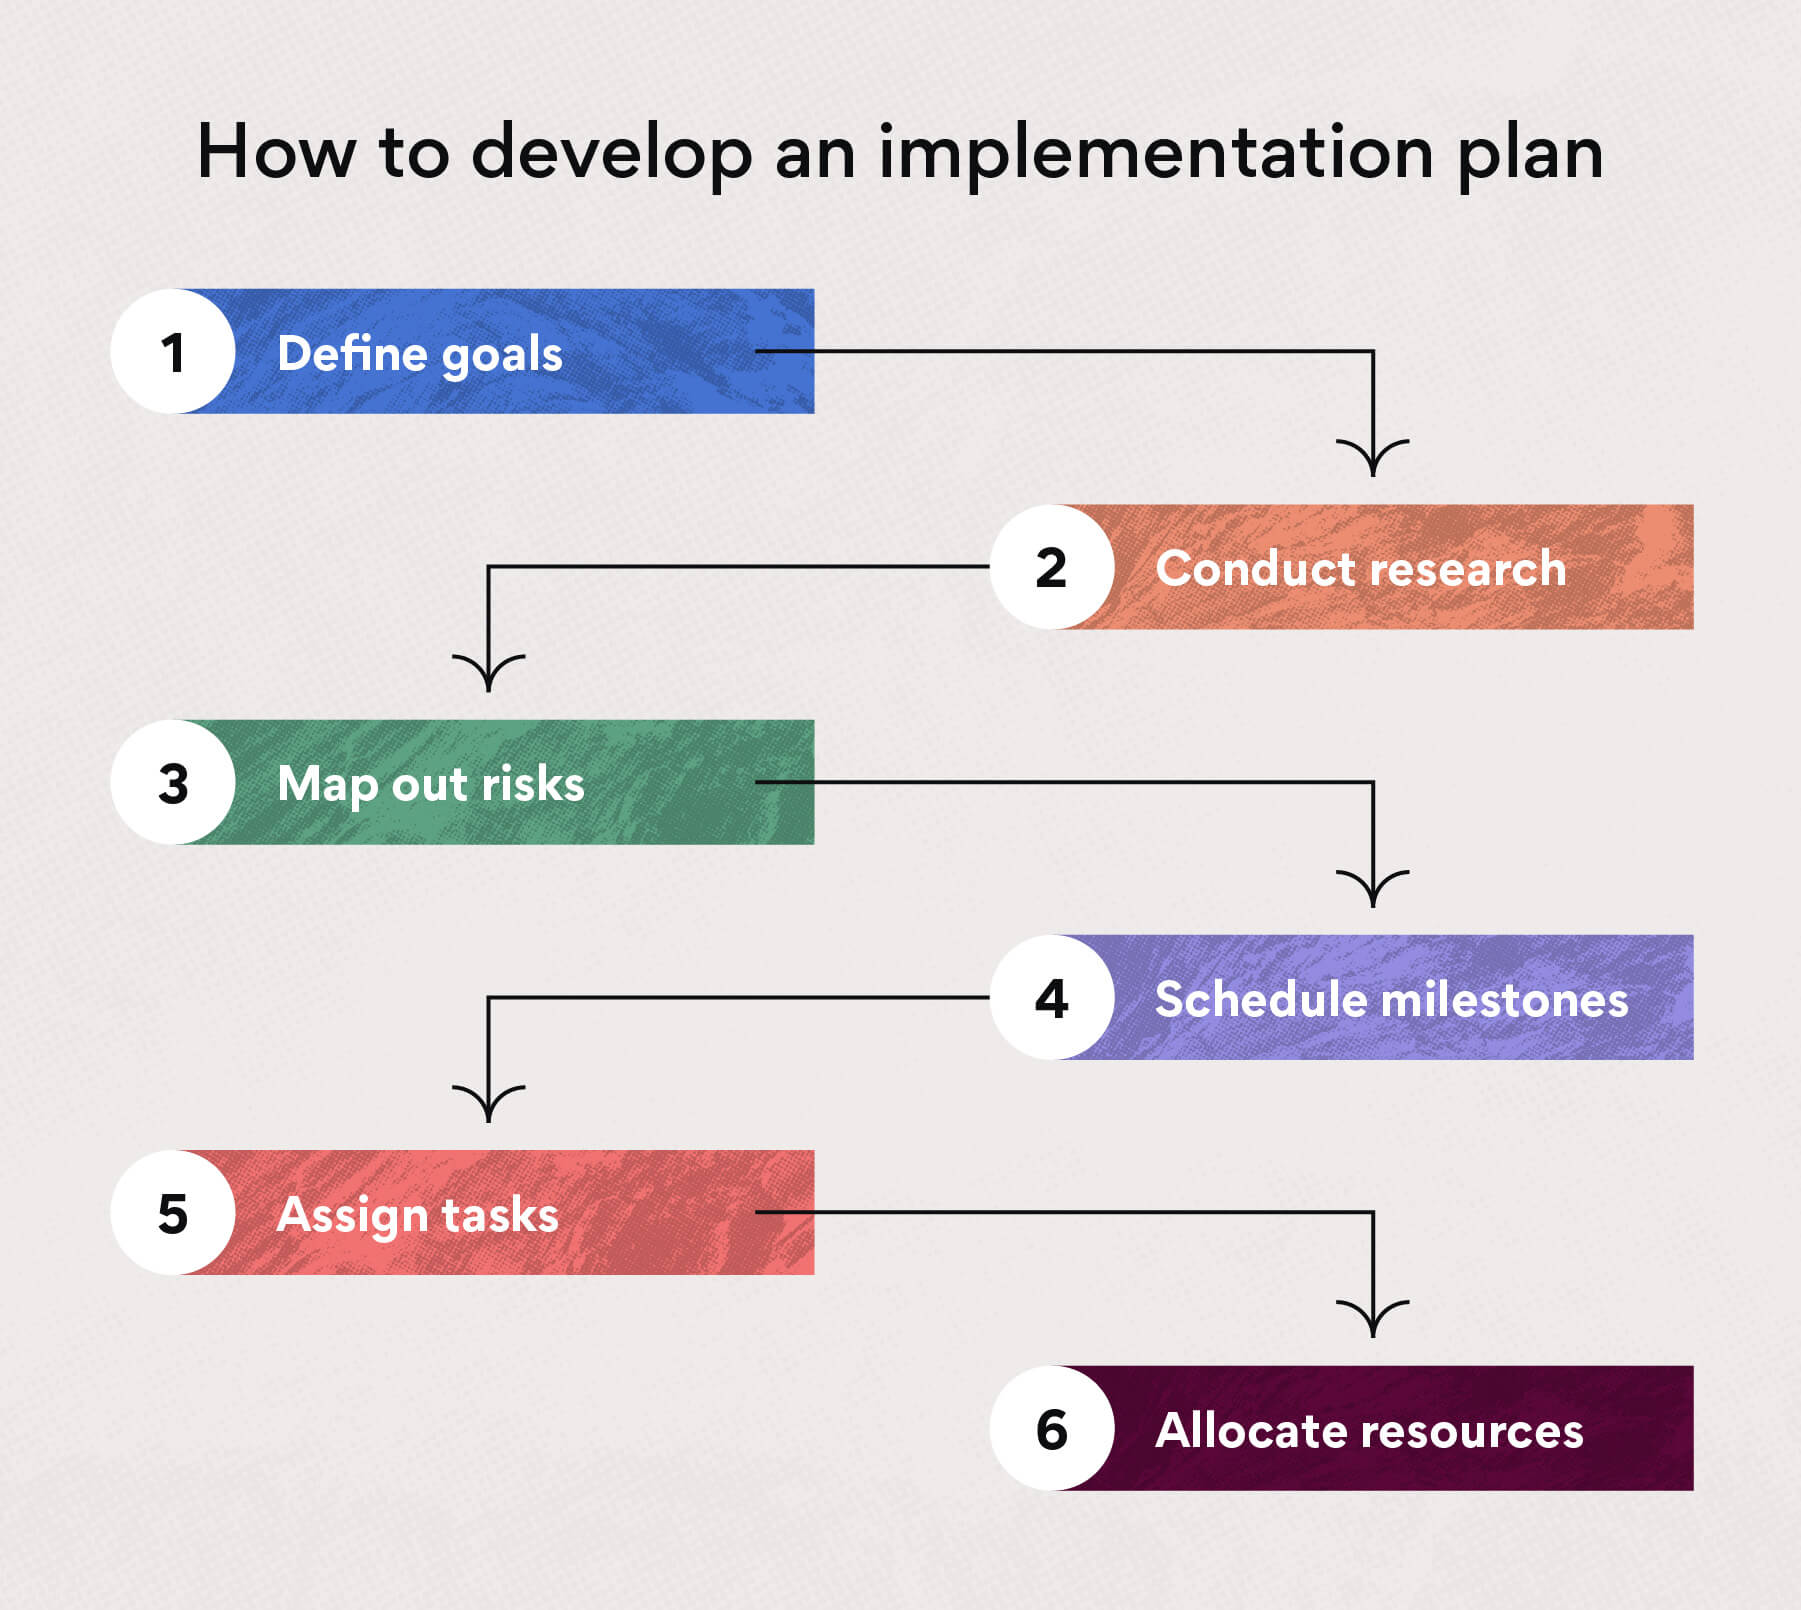 How to develop an implementation plan